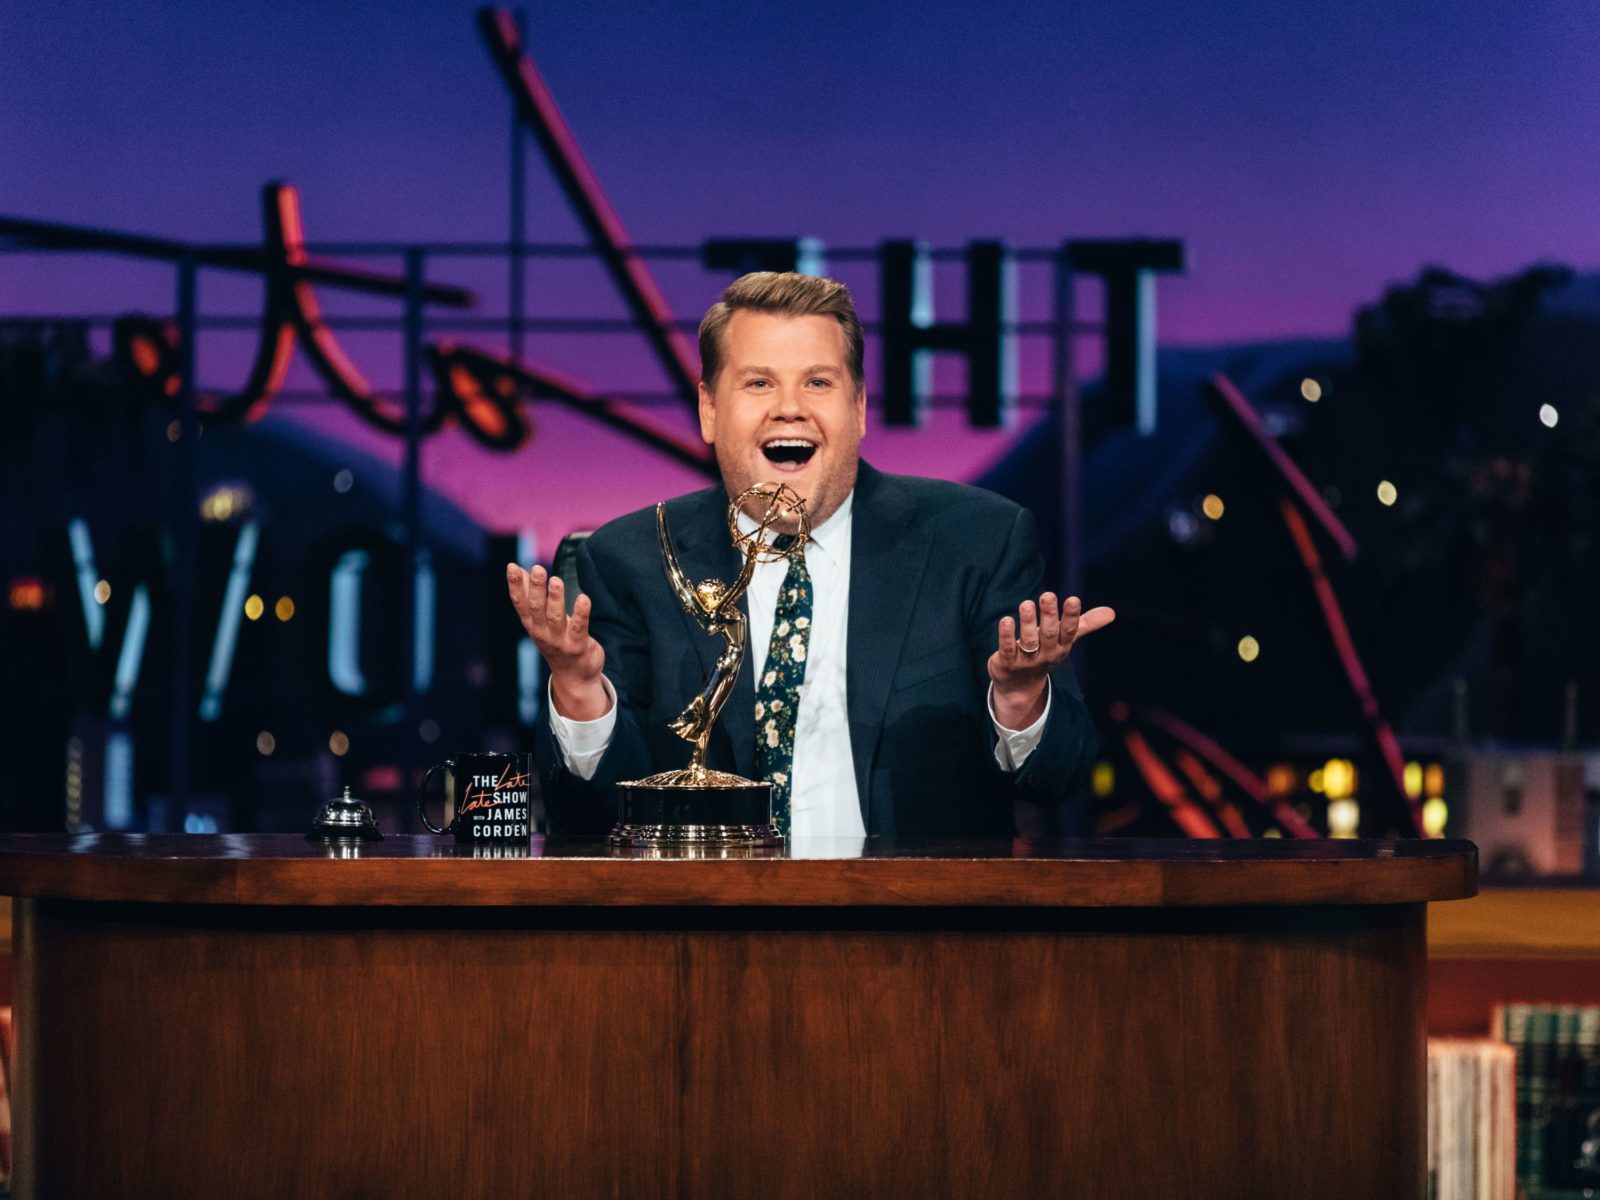 James Corden will continue to host The Late Late Show on CBS into next decade